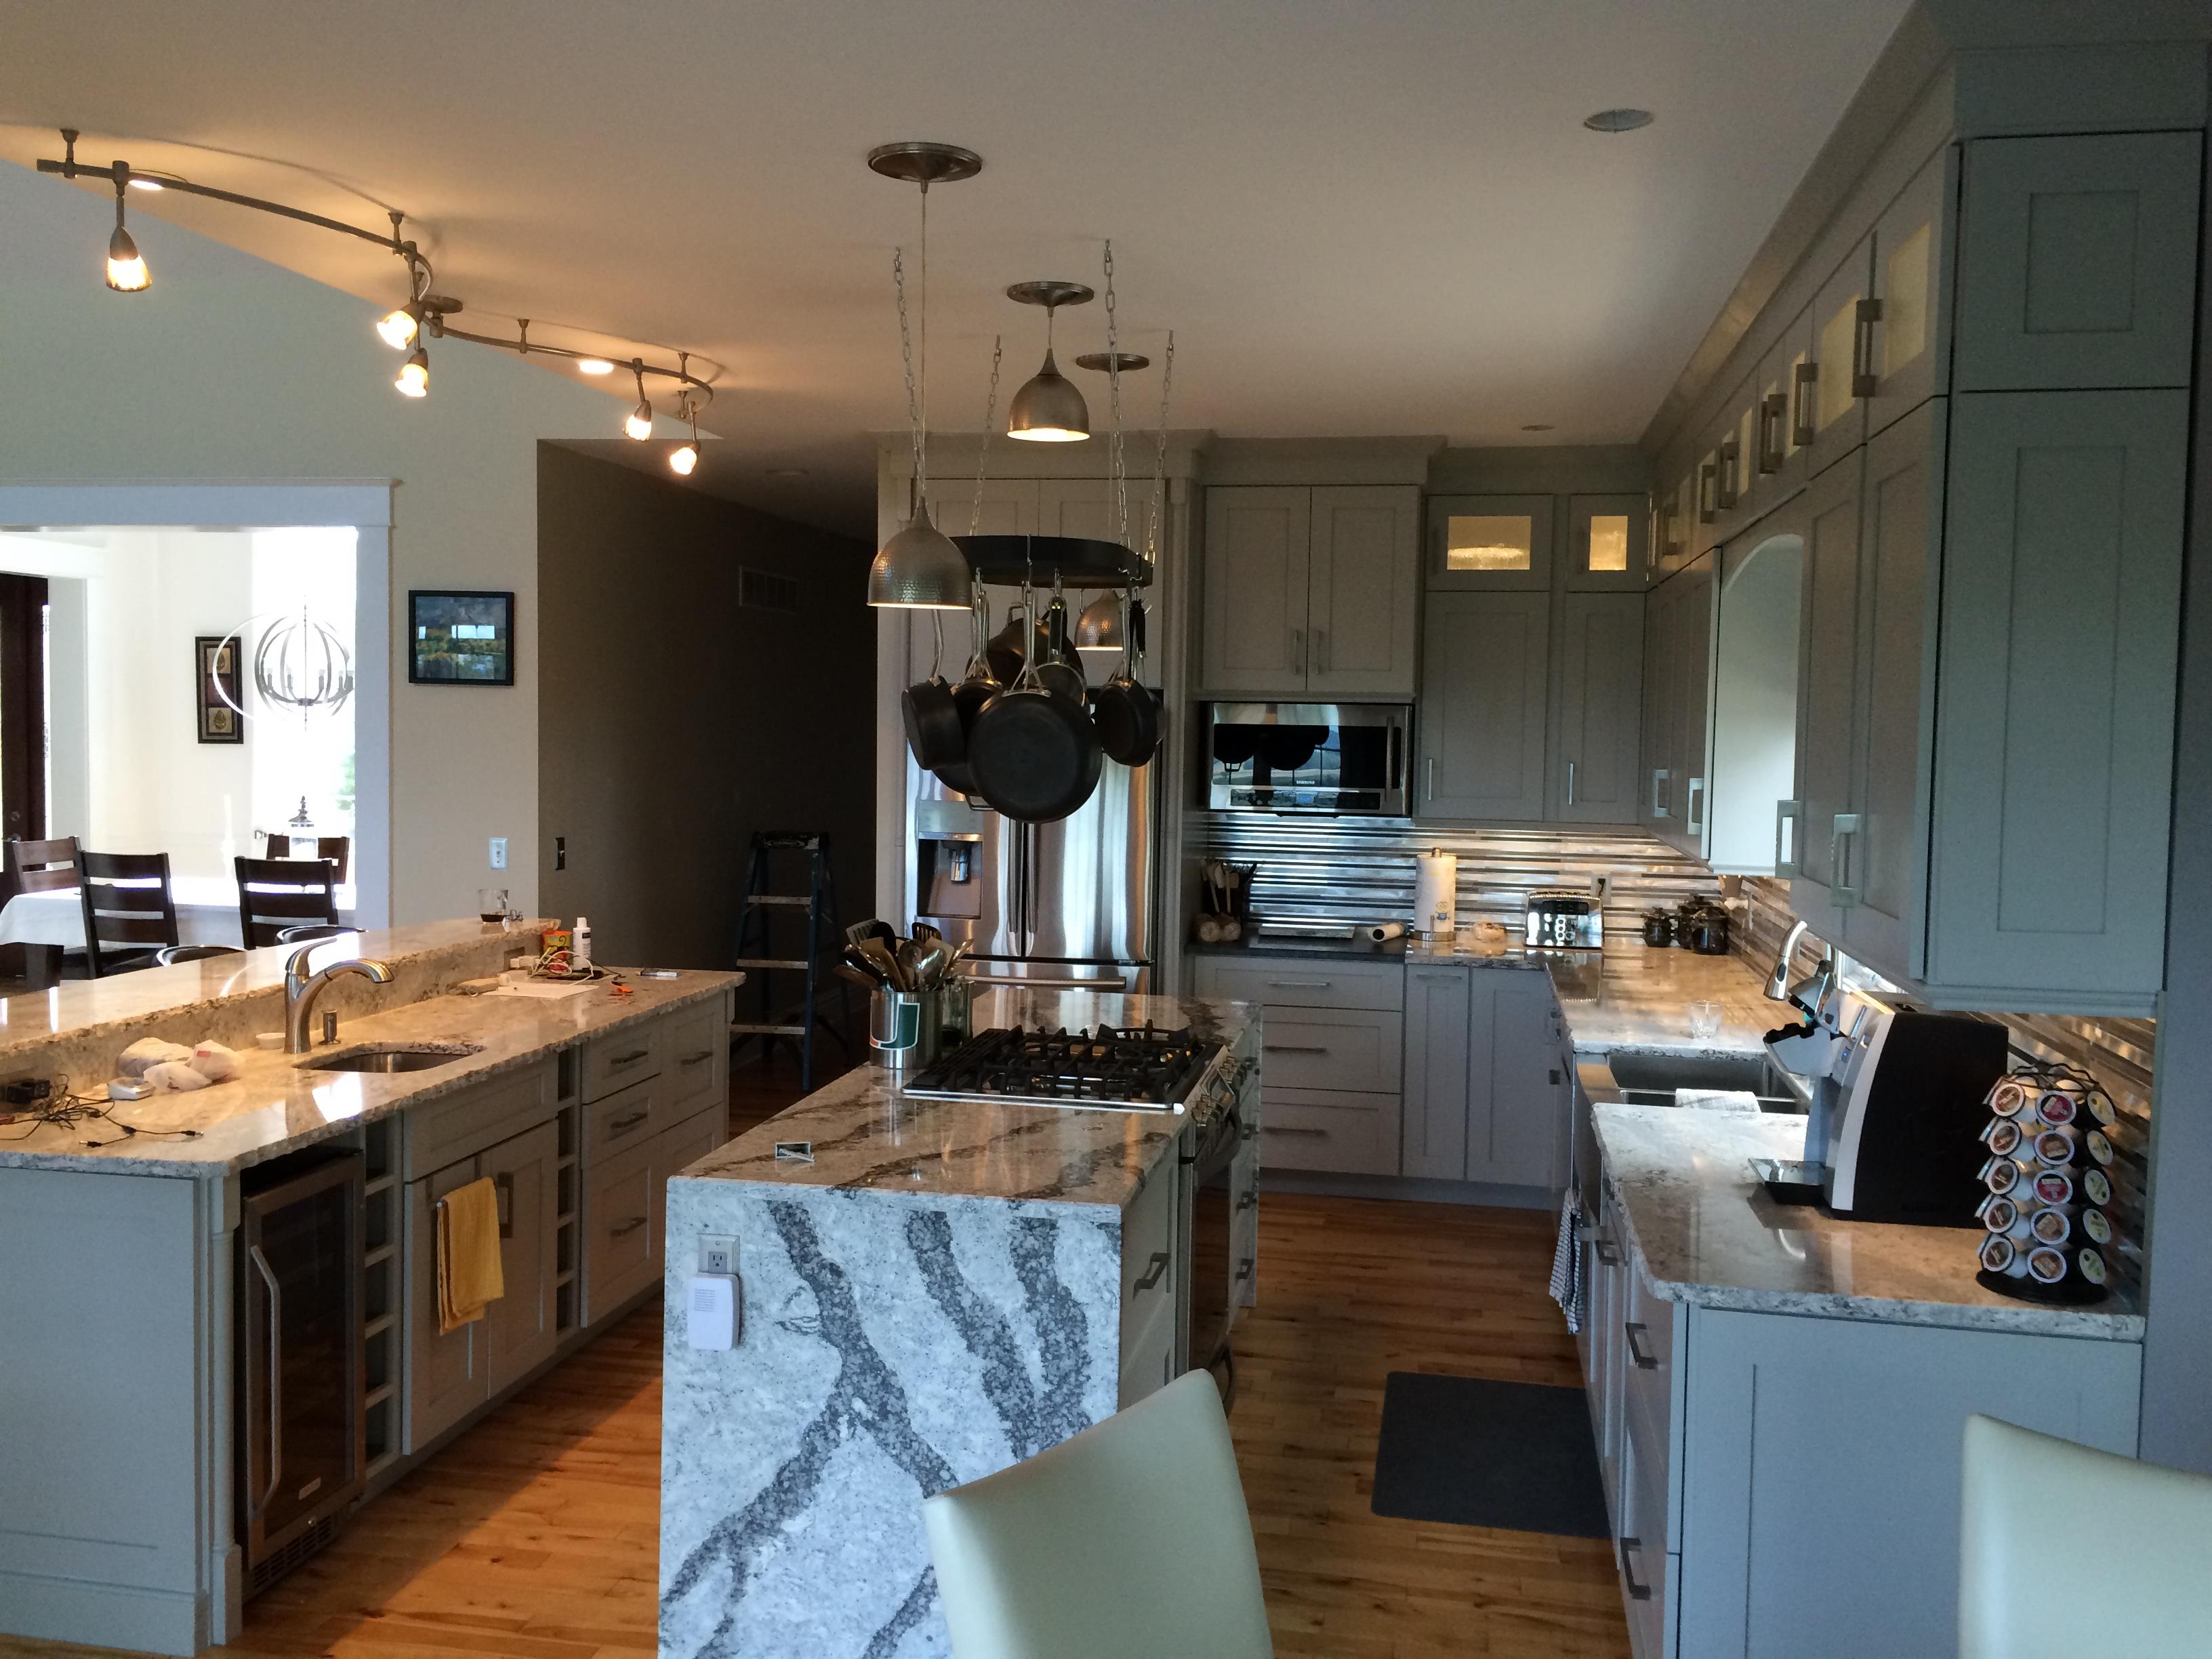 Modern Double Island Kitchen After 2